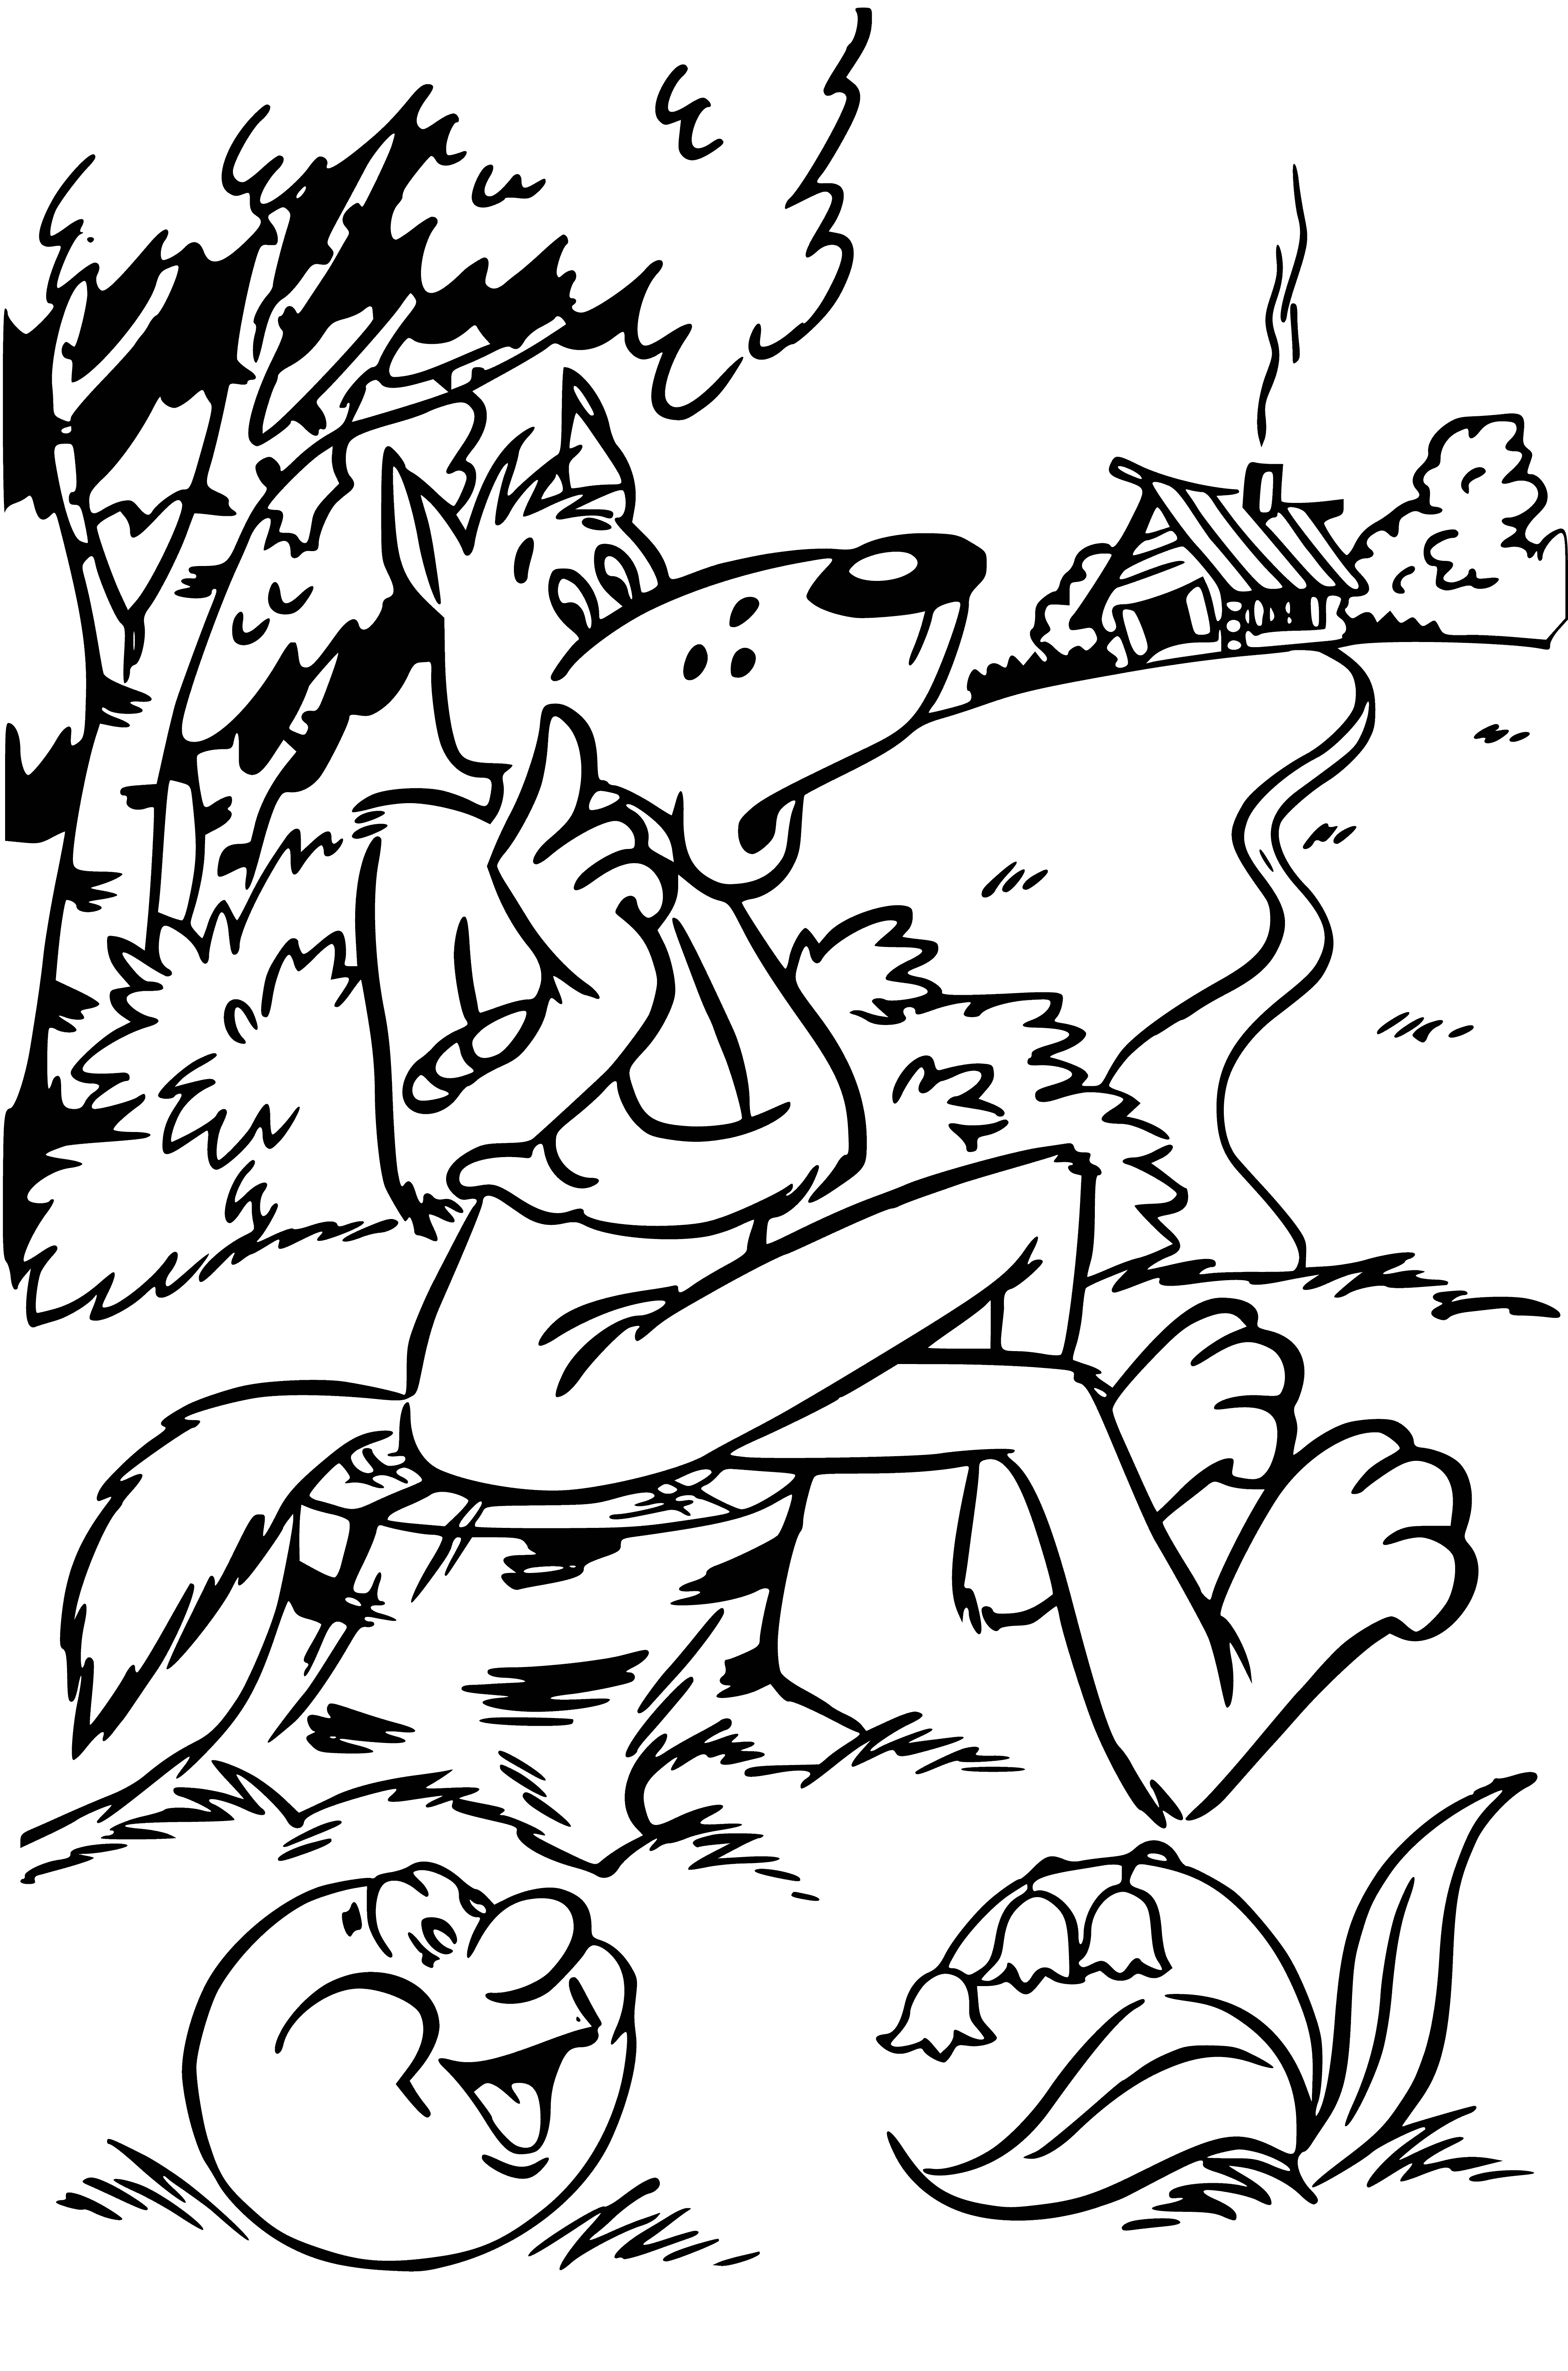 coloring page: Gingerbread Man escapes Wolf by running into a house the Wolf can't enter.